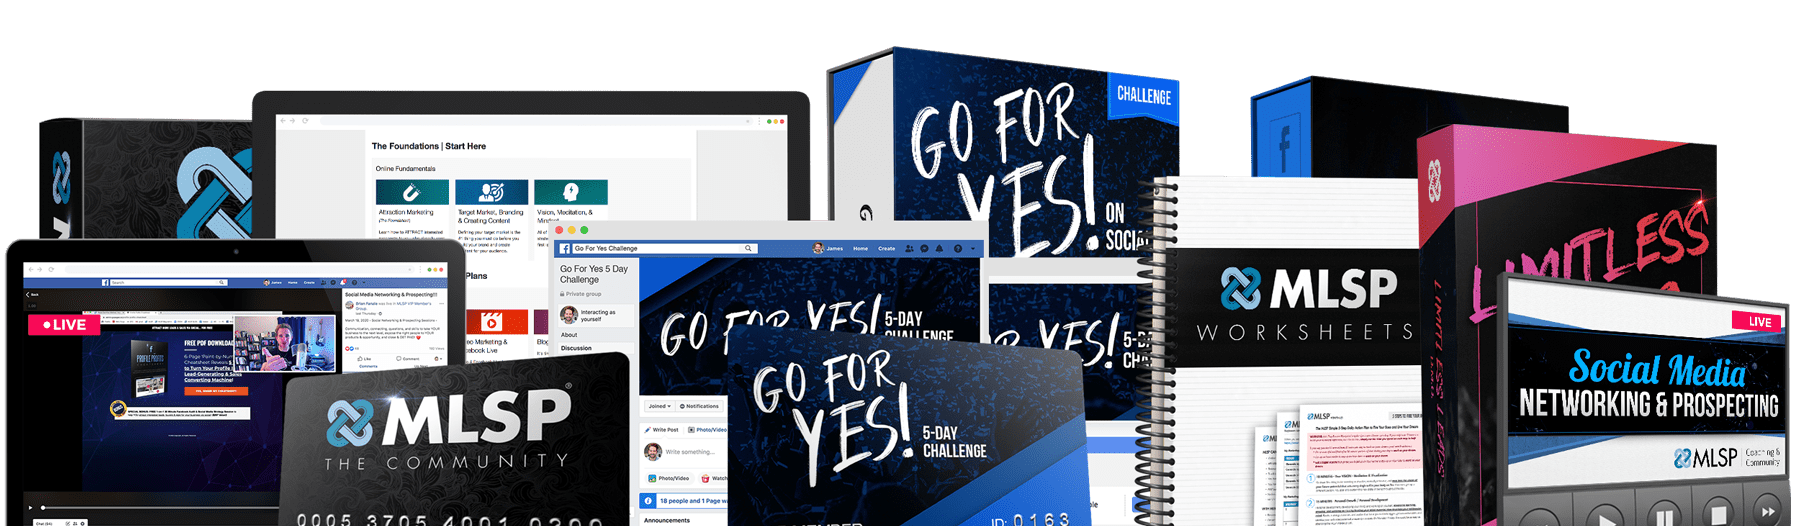 5-Day 'Go For Yes!' Challenge